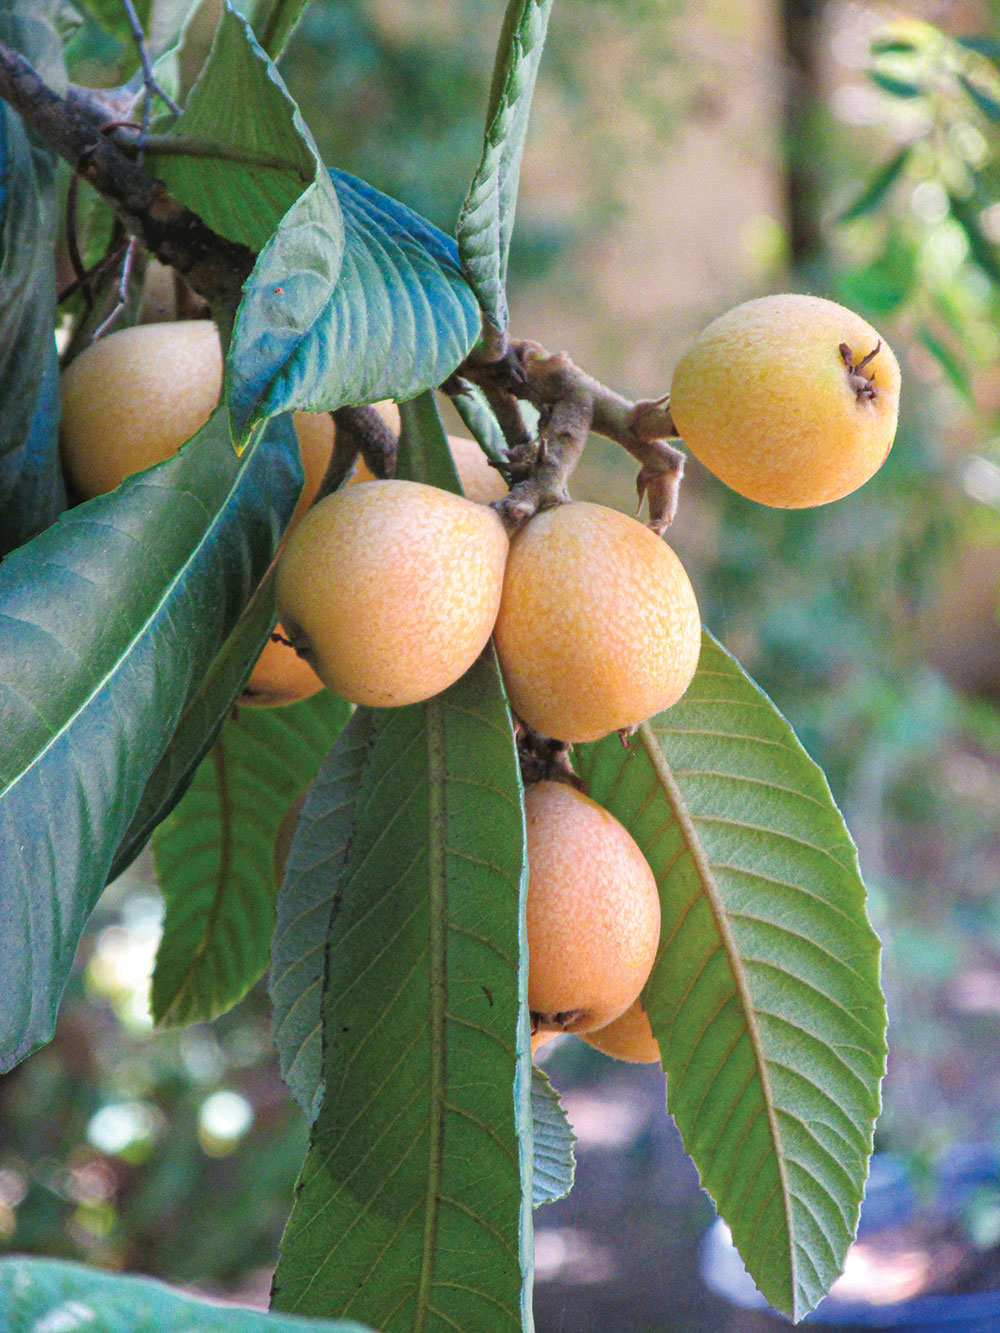 The loquat tree is from China